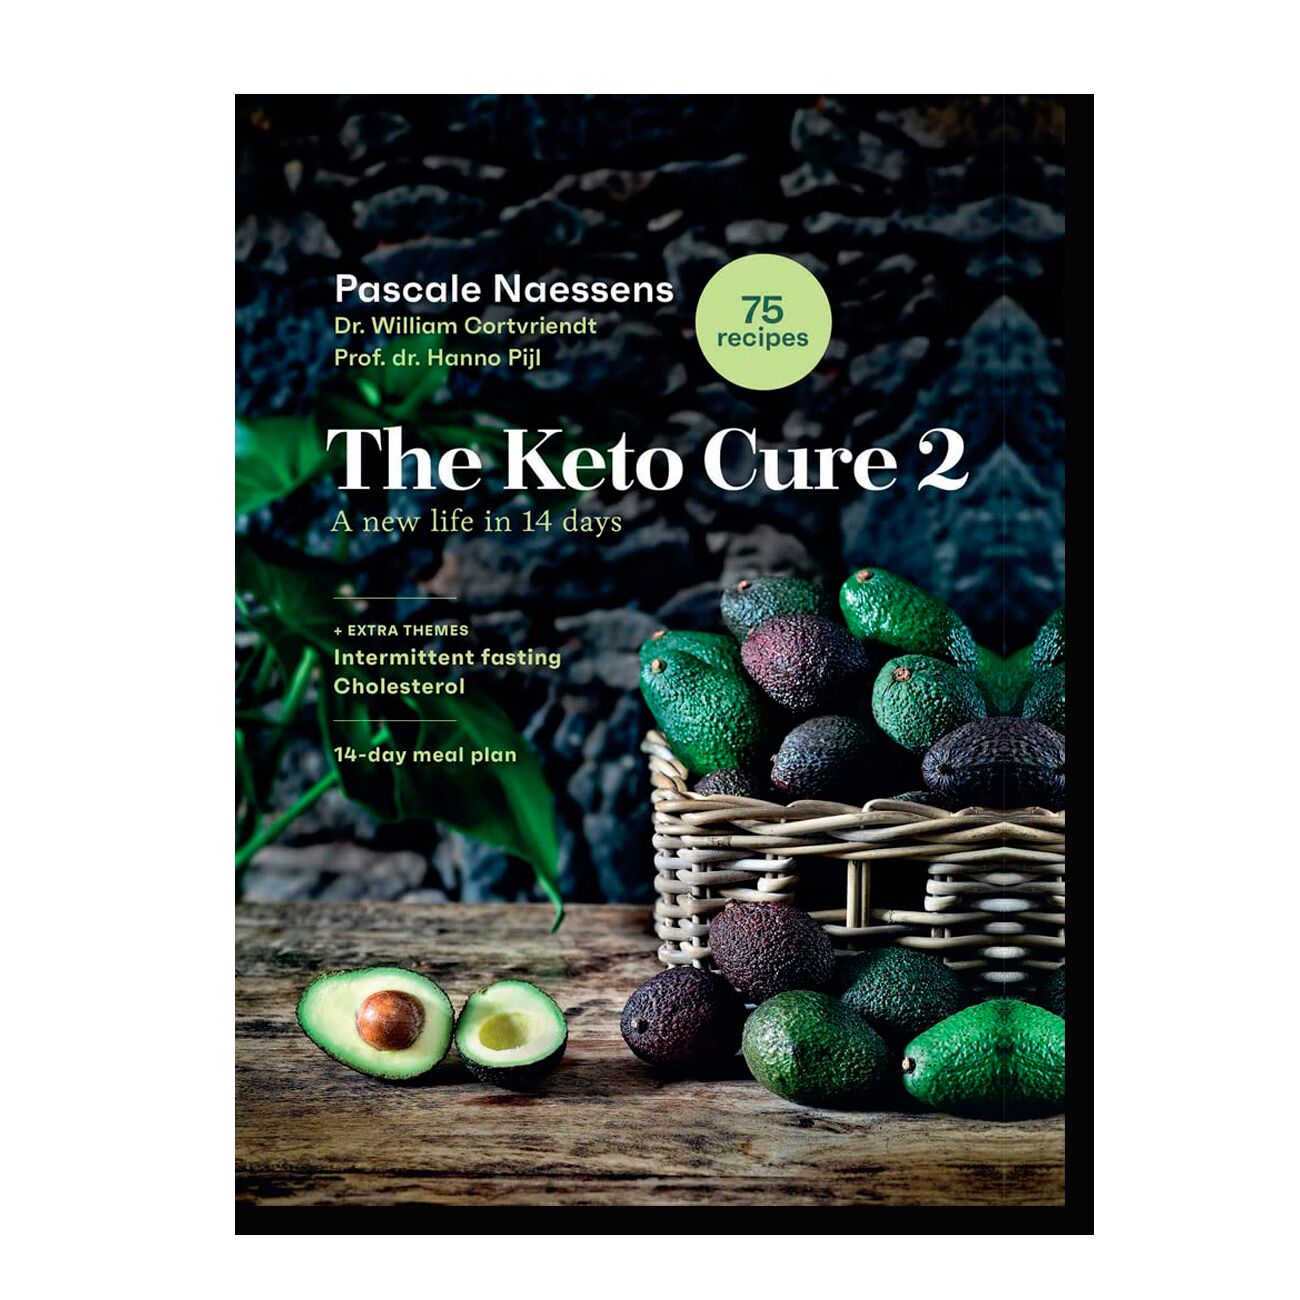 The Keto Cure 2: A New Life in 14 Days